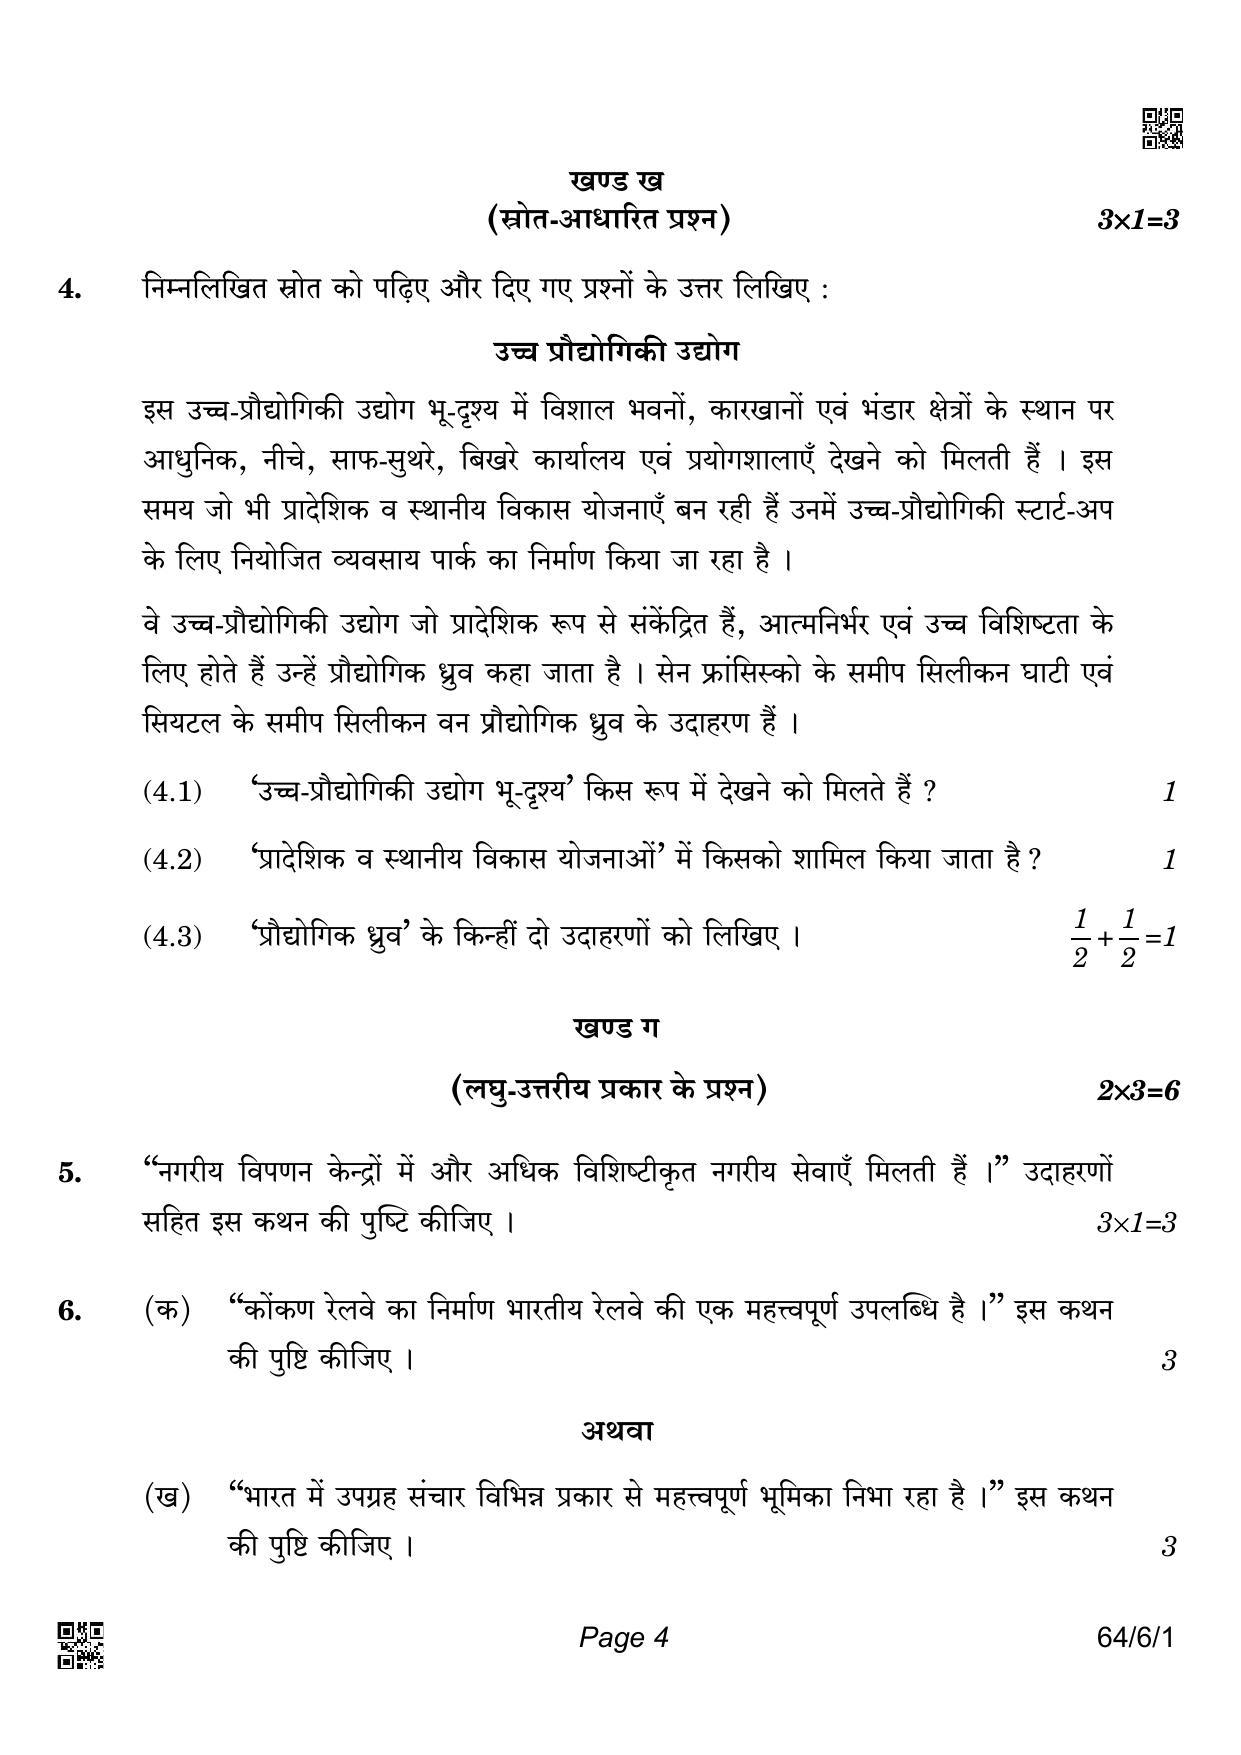 CBSE Class 12 64-6-1 GEOGRAPHY 2022 Compartment Question Paper - Page 4